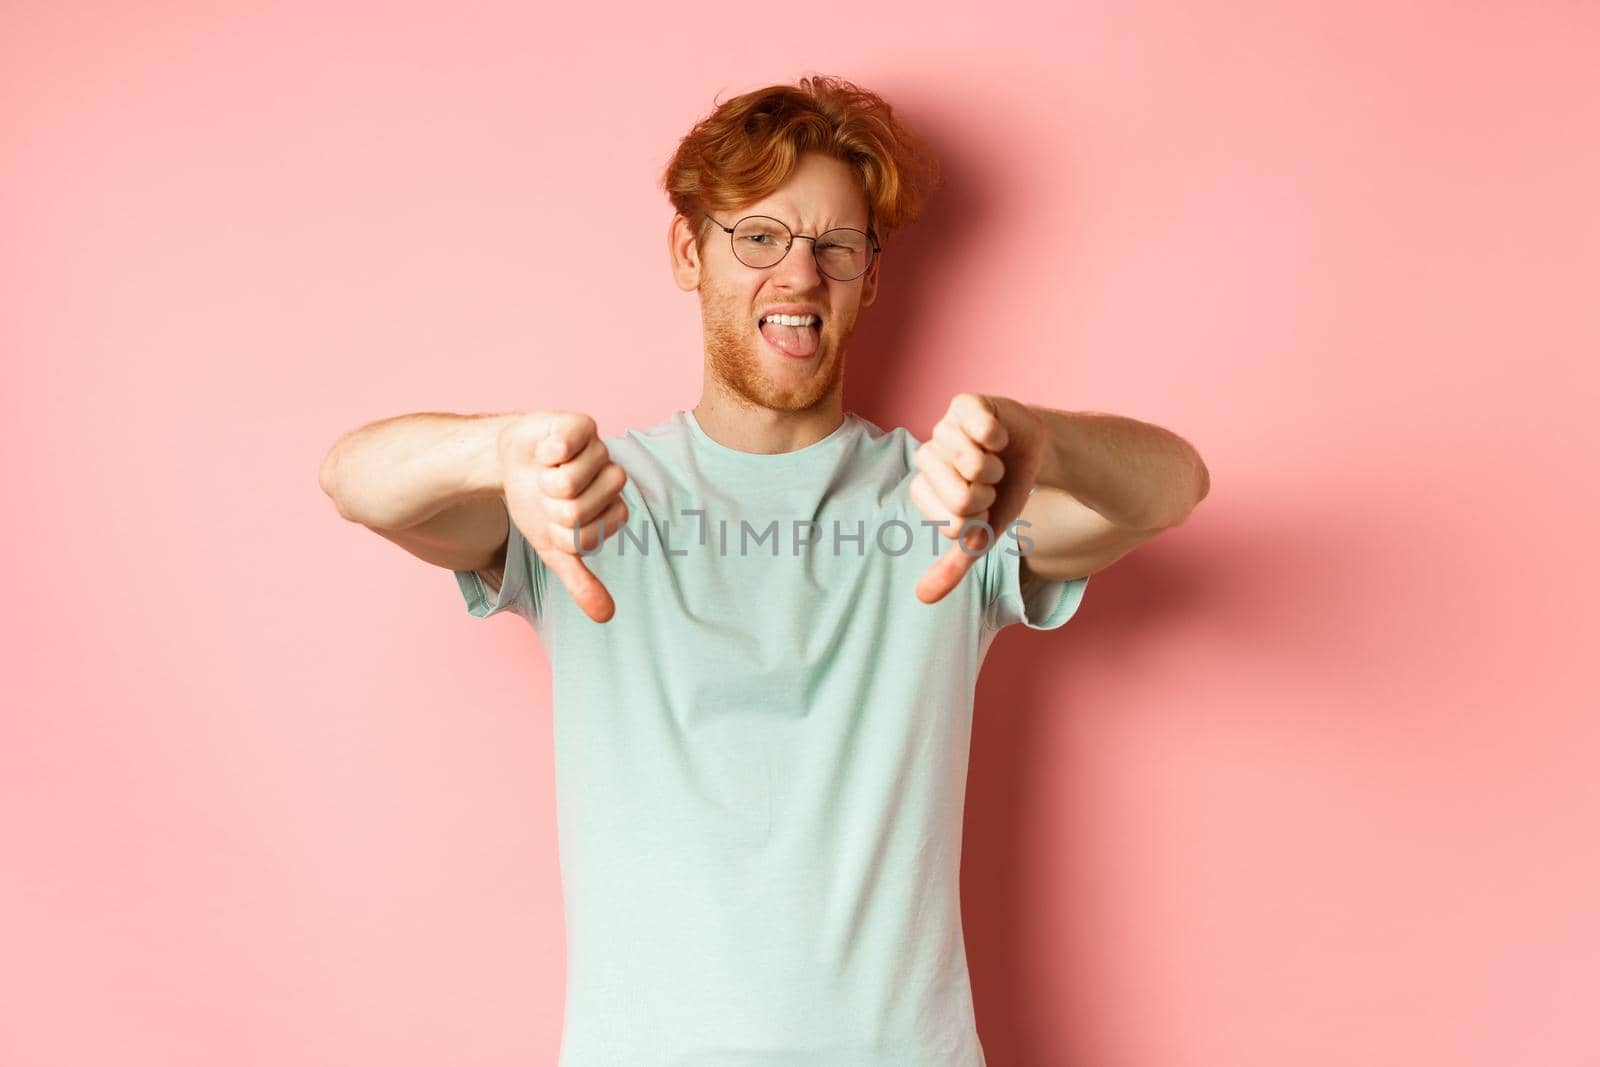 Disgusted redhead man in t-shirt and glasses showing thumbs down and tongue, grimacing from aversion, standing over pink background.